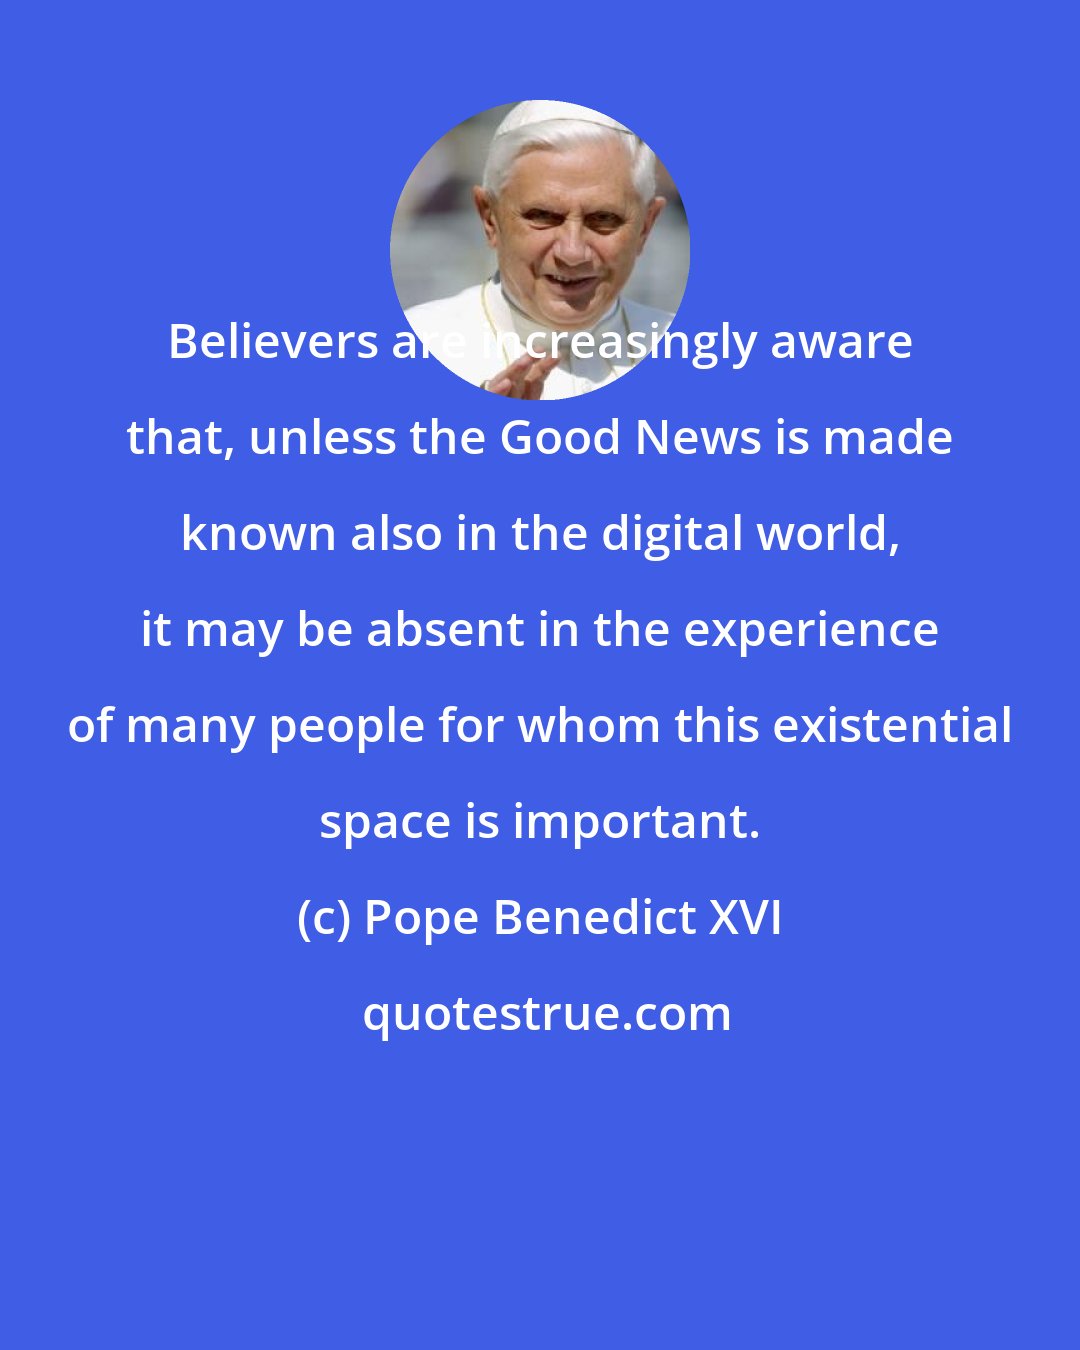 Pope Benedict XVI: Believers are increasingly aware that, unless the Good News is made known also in the digital world, it may be absent in the experience of many people for whom this existential space is important.